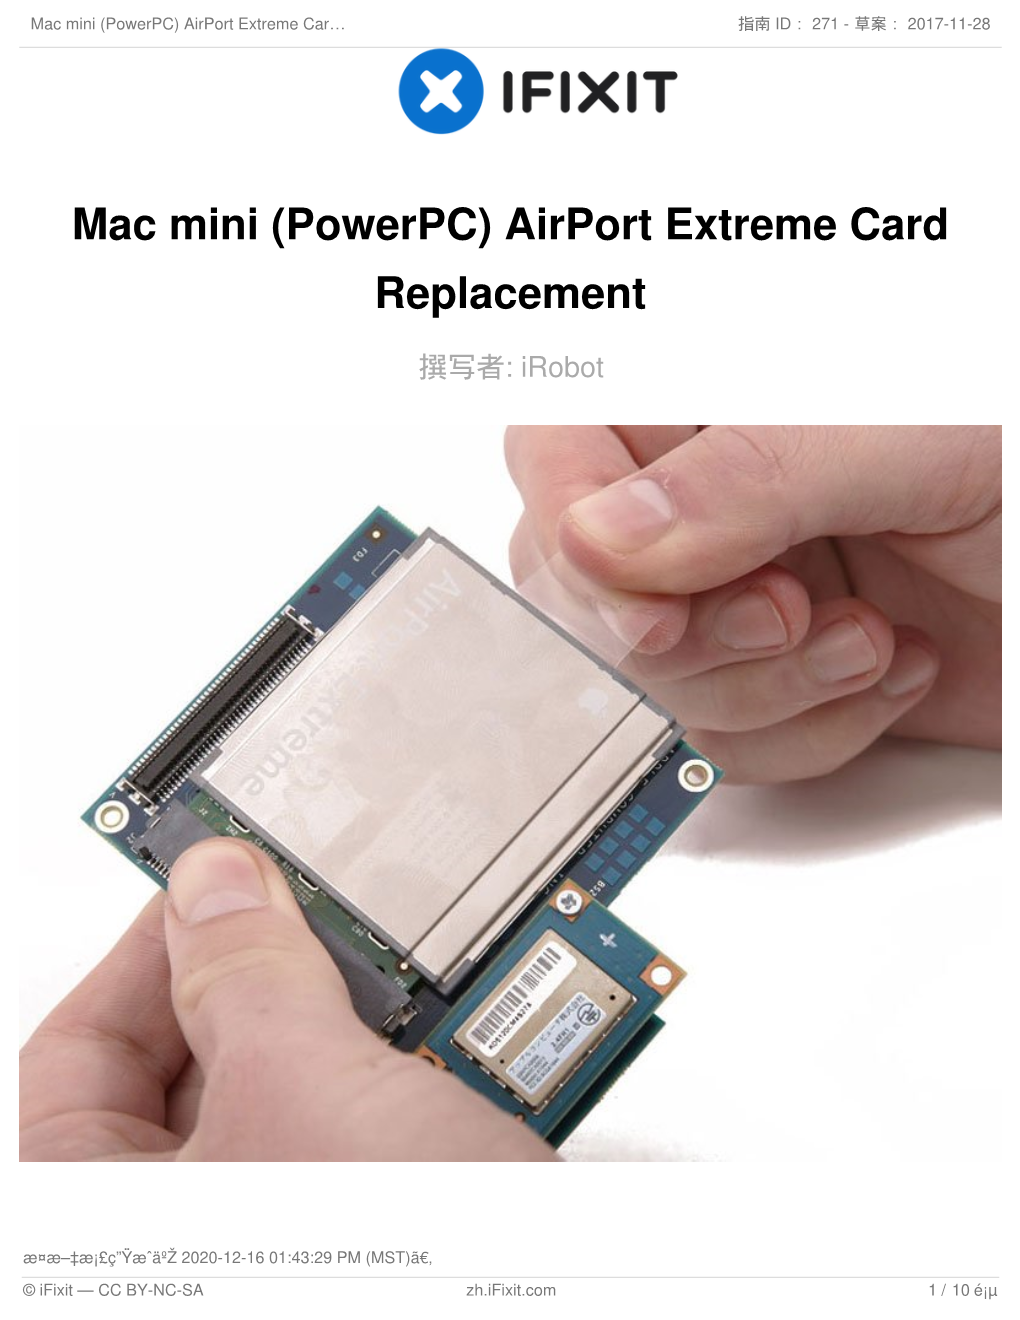 Mac Mini (Powerpc) Airport Extreme Card Replacement